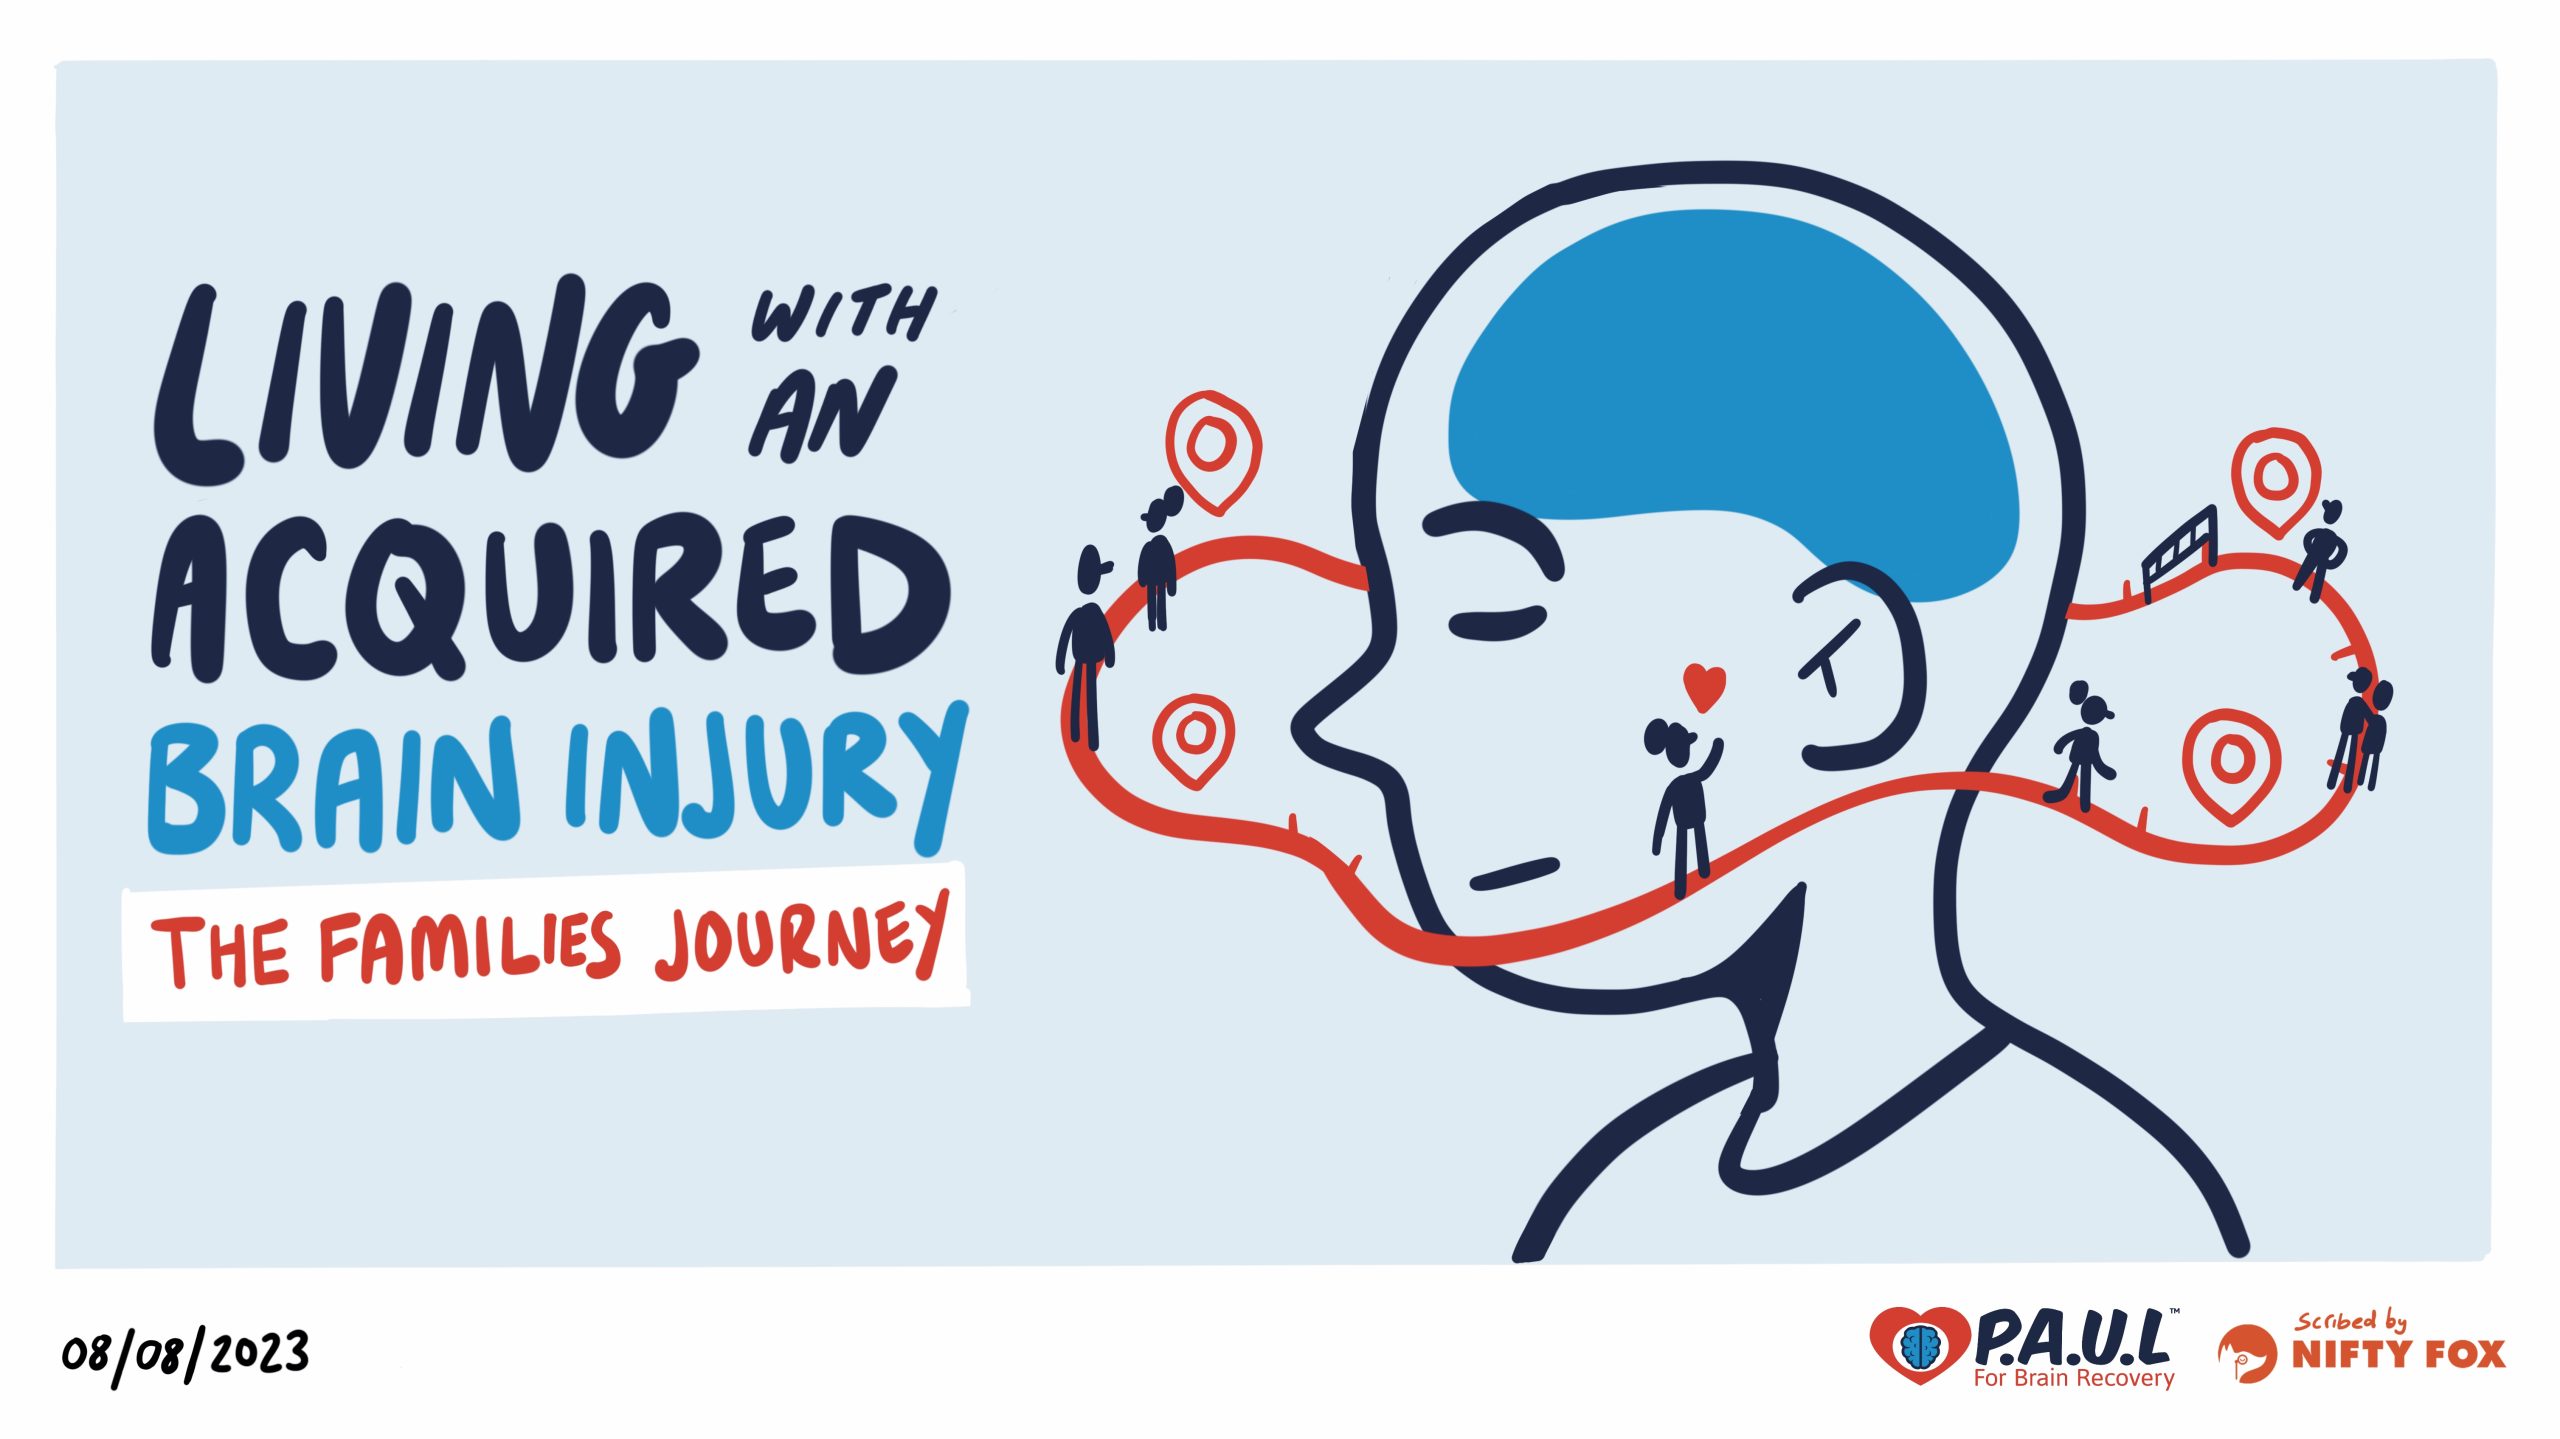 Living with and Acquired Brain Injury - The families Journey